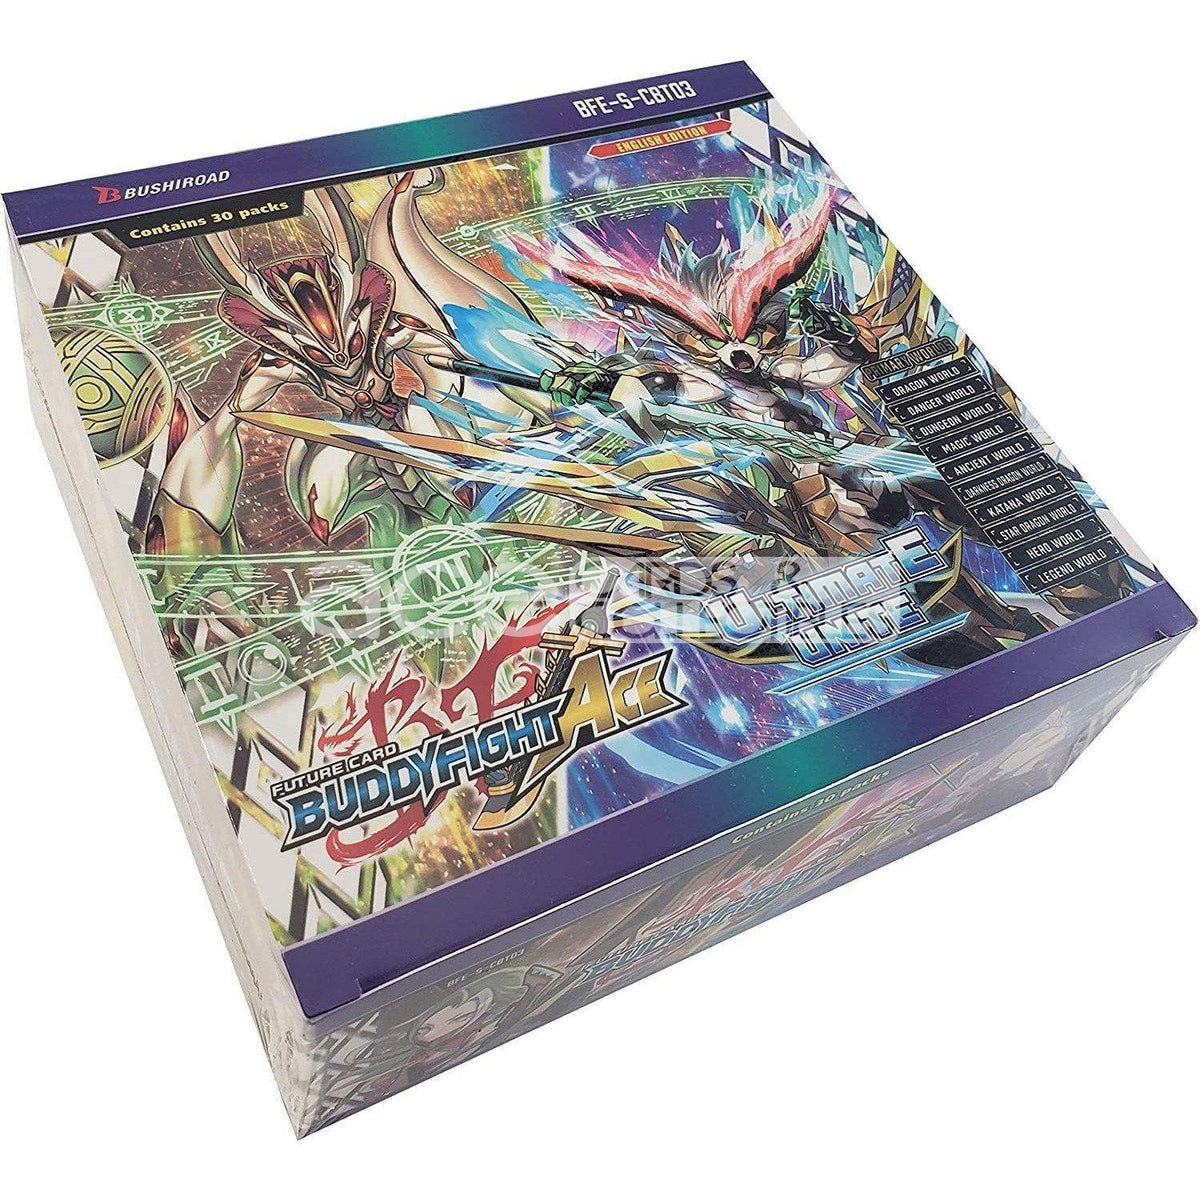 Future Card Buddyfight Ace Ultimate Unite [BFE-S-CBT03] (English)-Booster Box (30 packs)-Bushiroad-Ace Cards & Collectibles